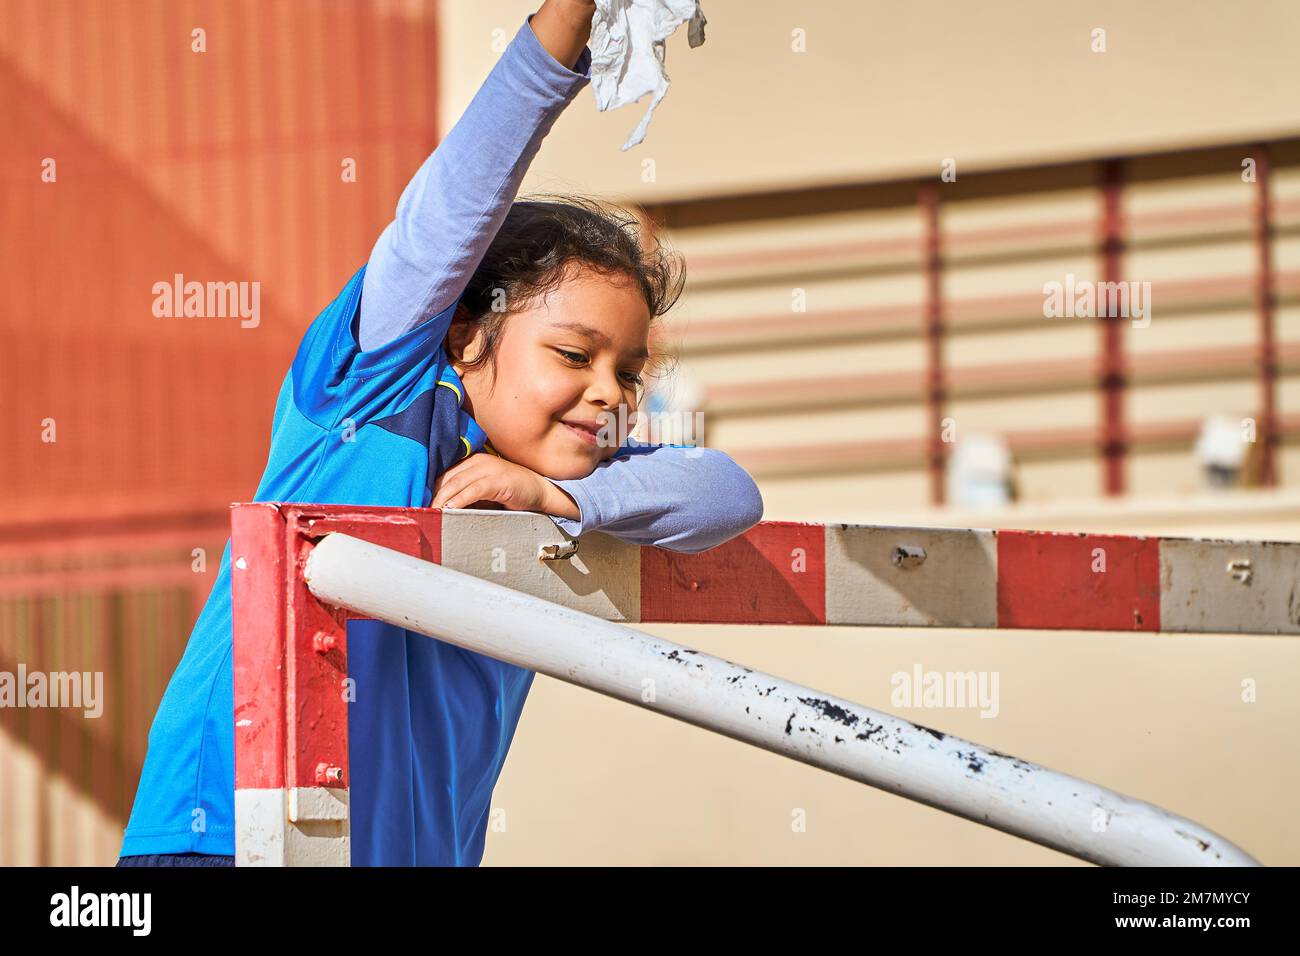 latin girl football player in a sport suit playing on a soccer goal Stock Photo